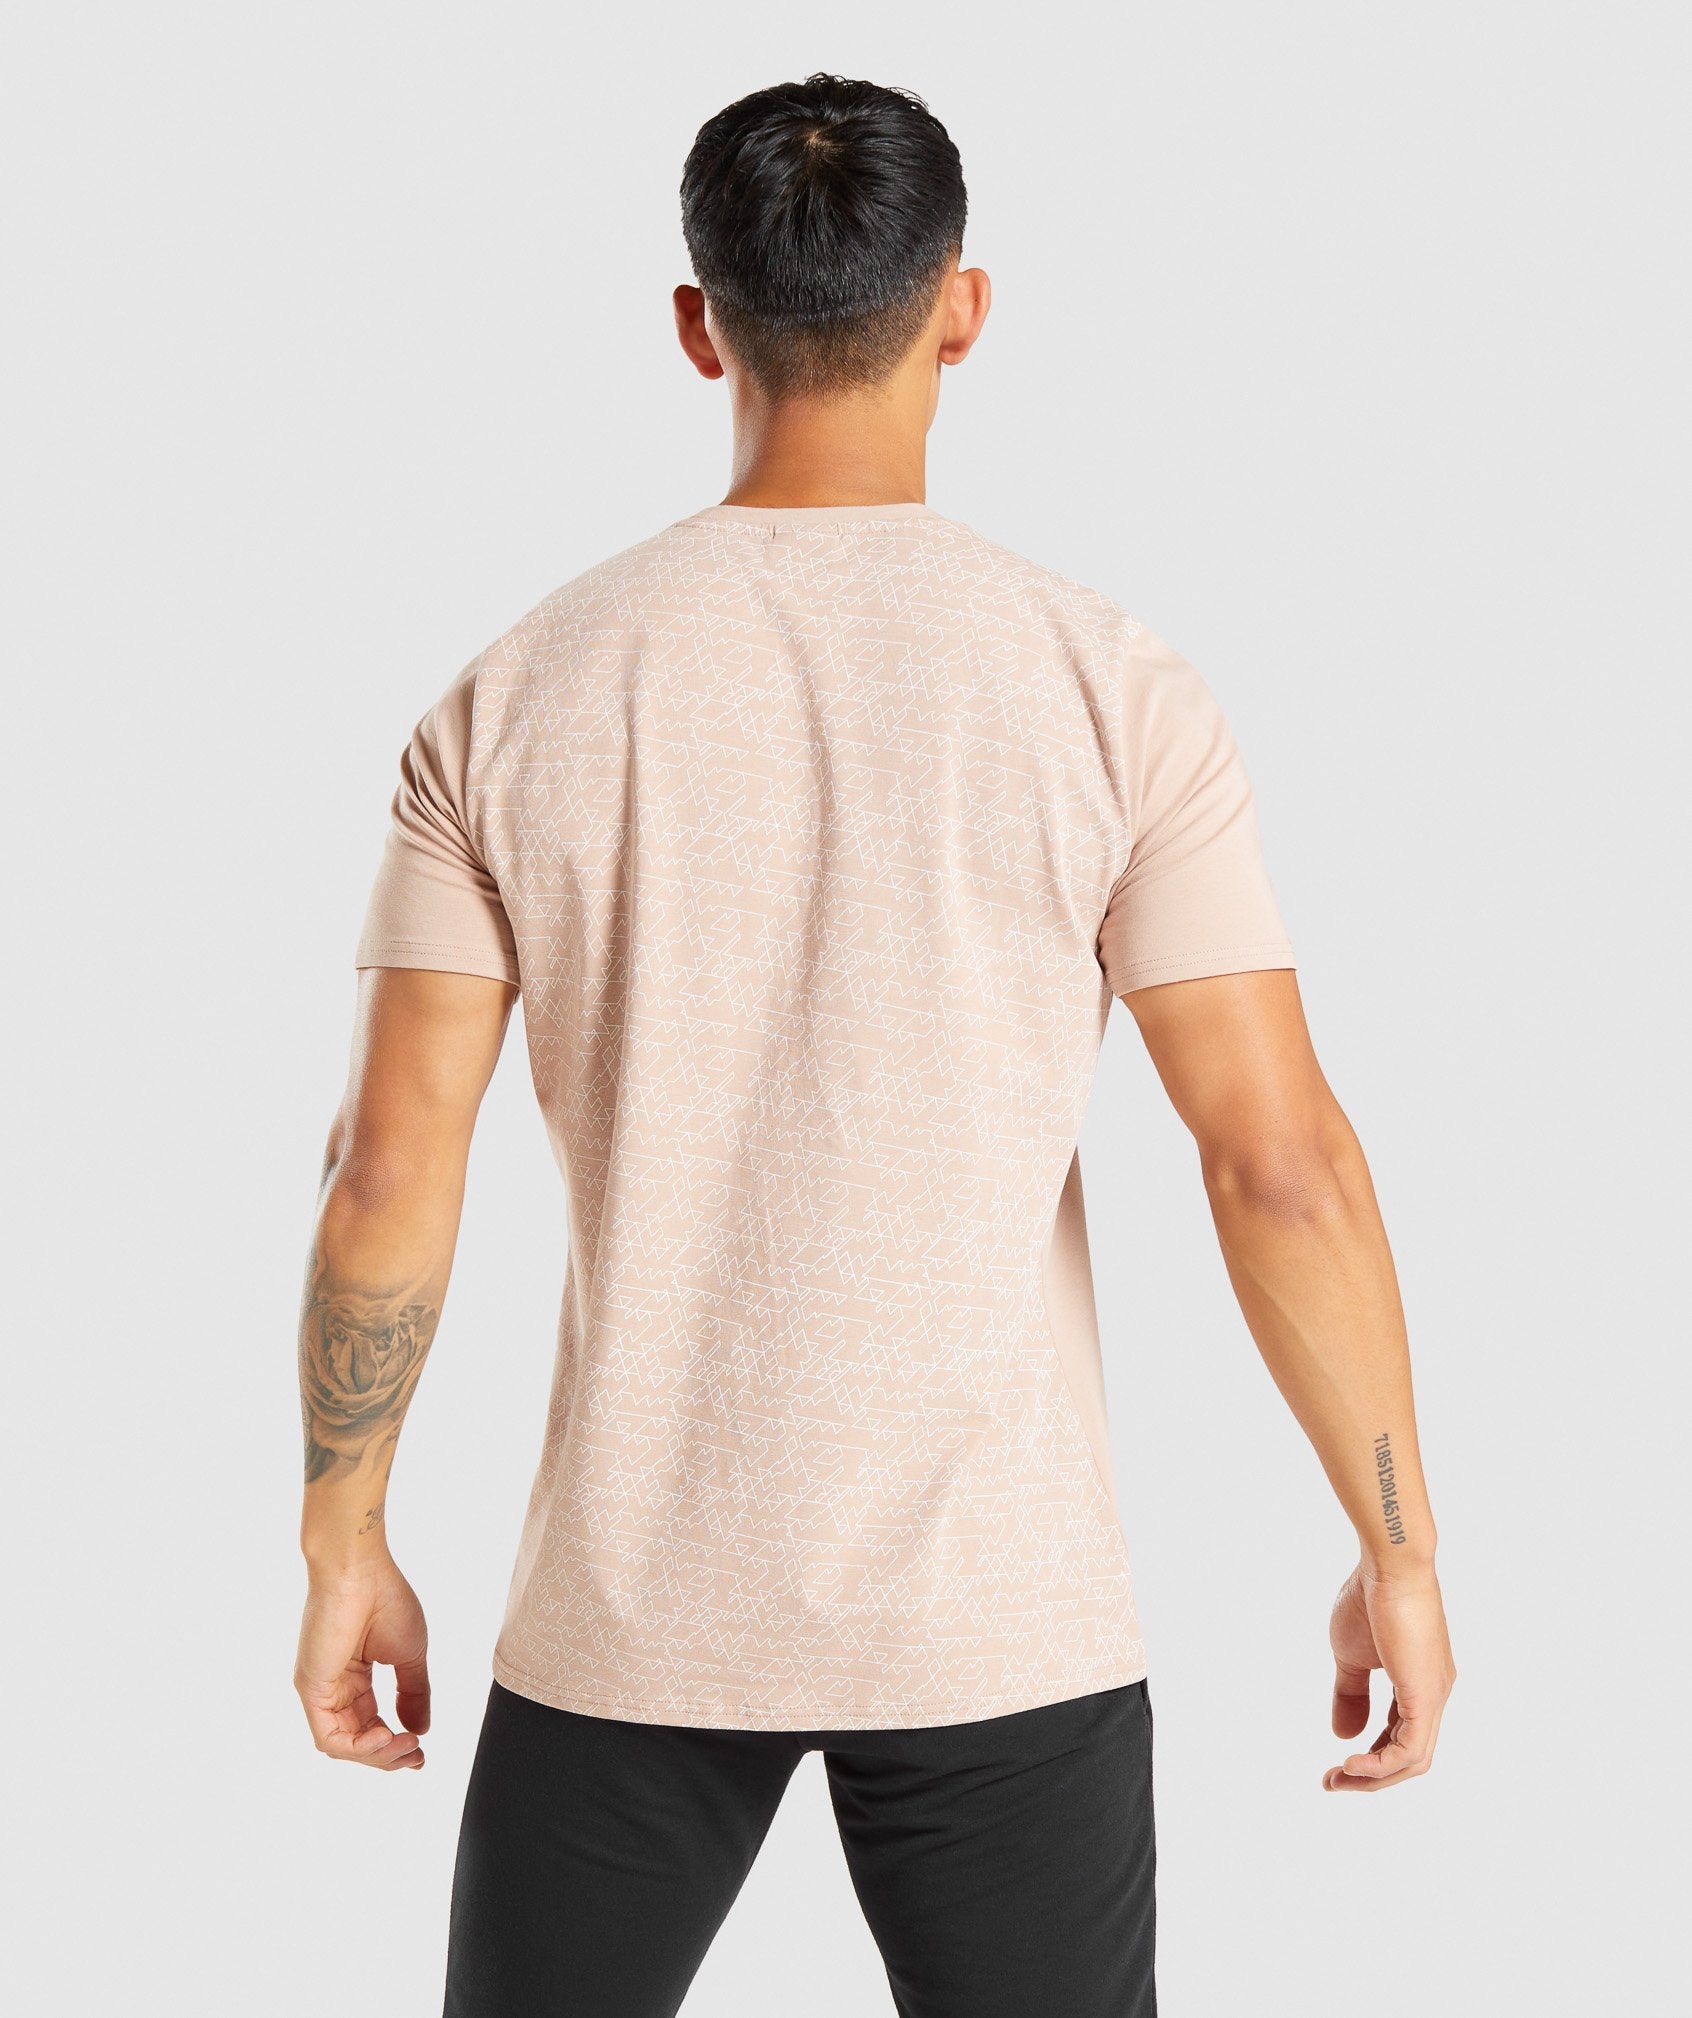 Linear Hex T-Shirt in Taupe - view 3